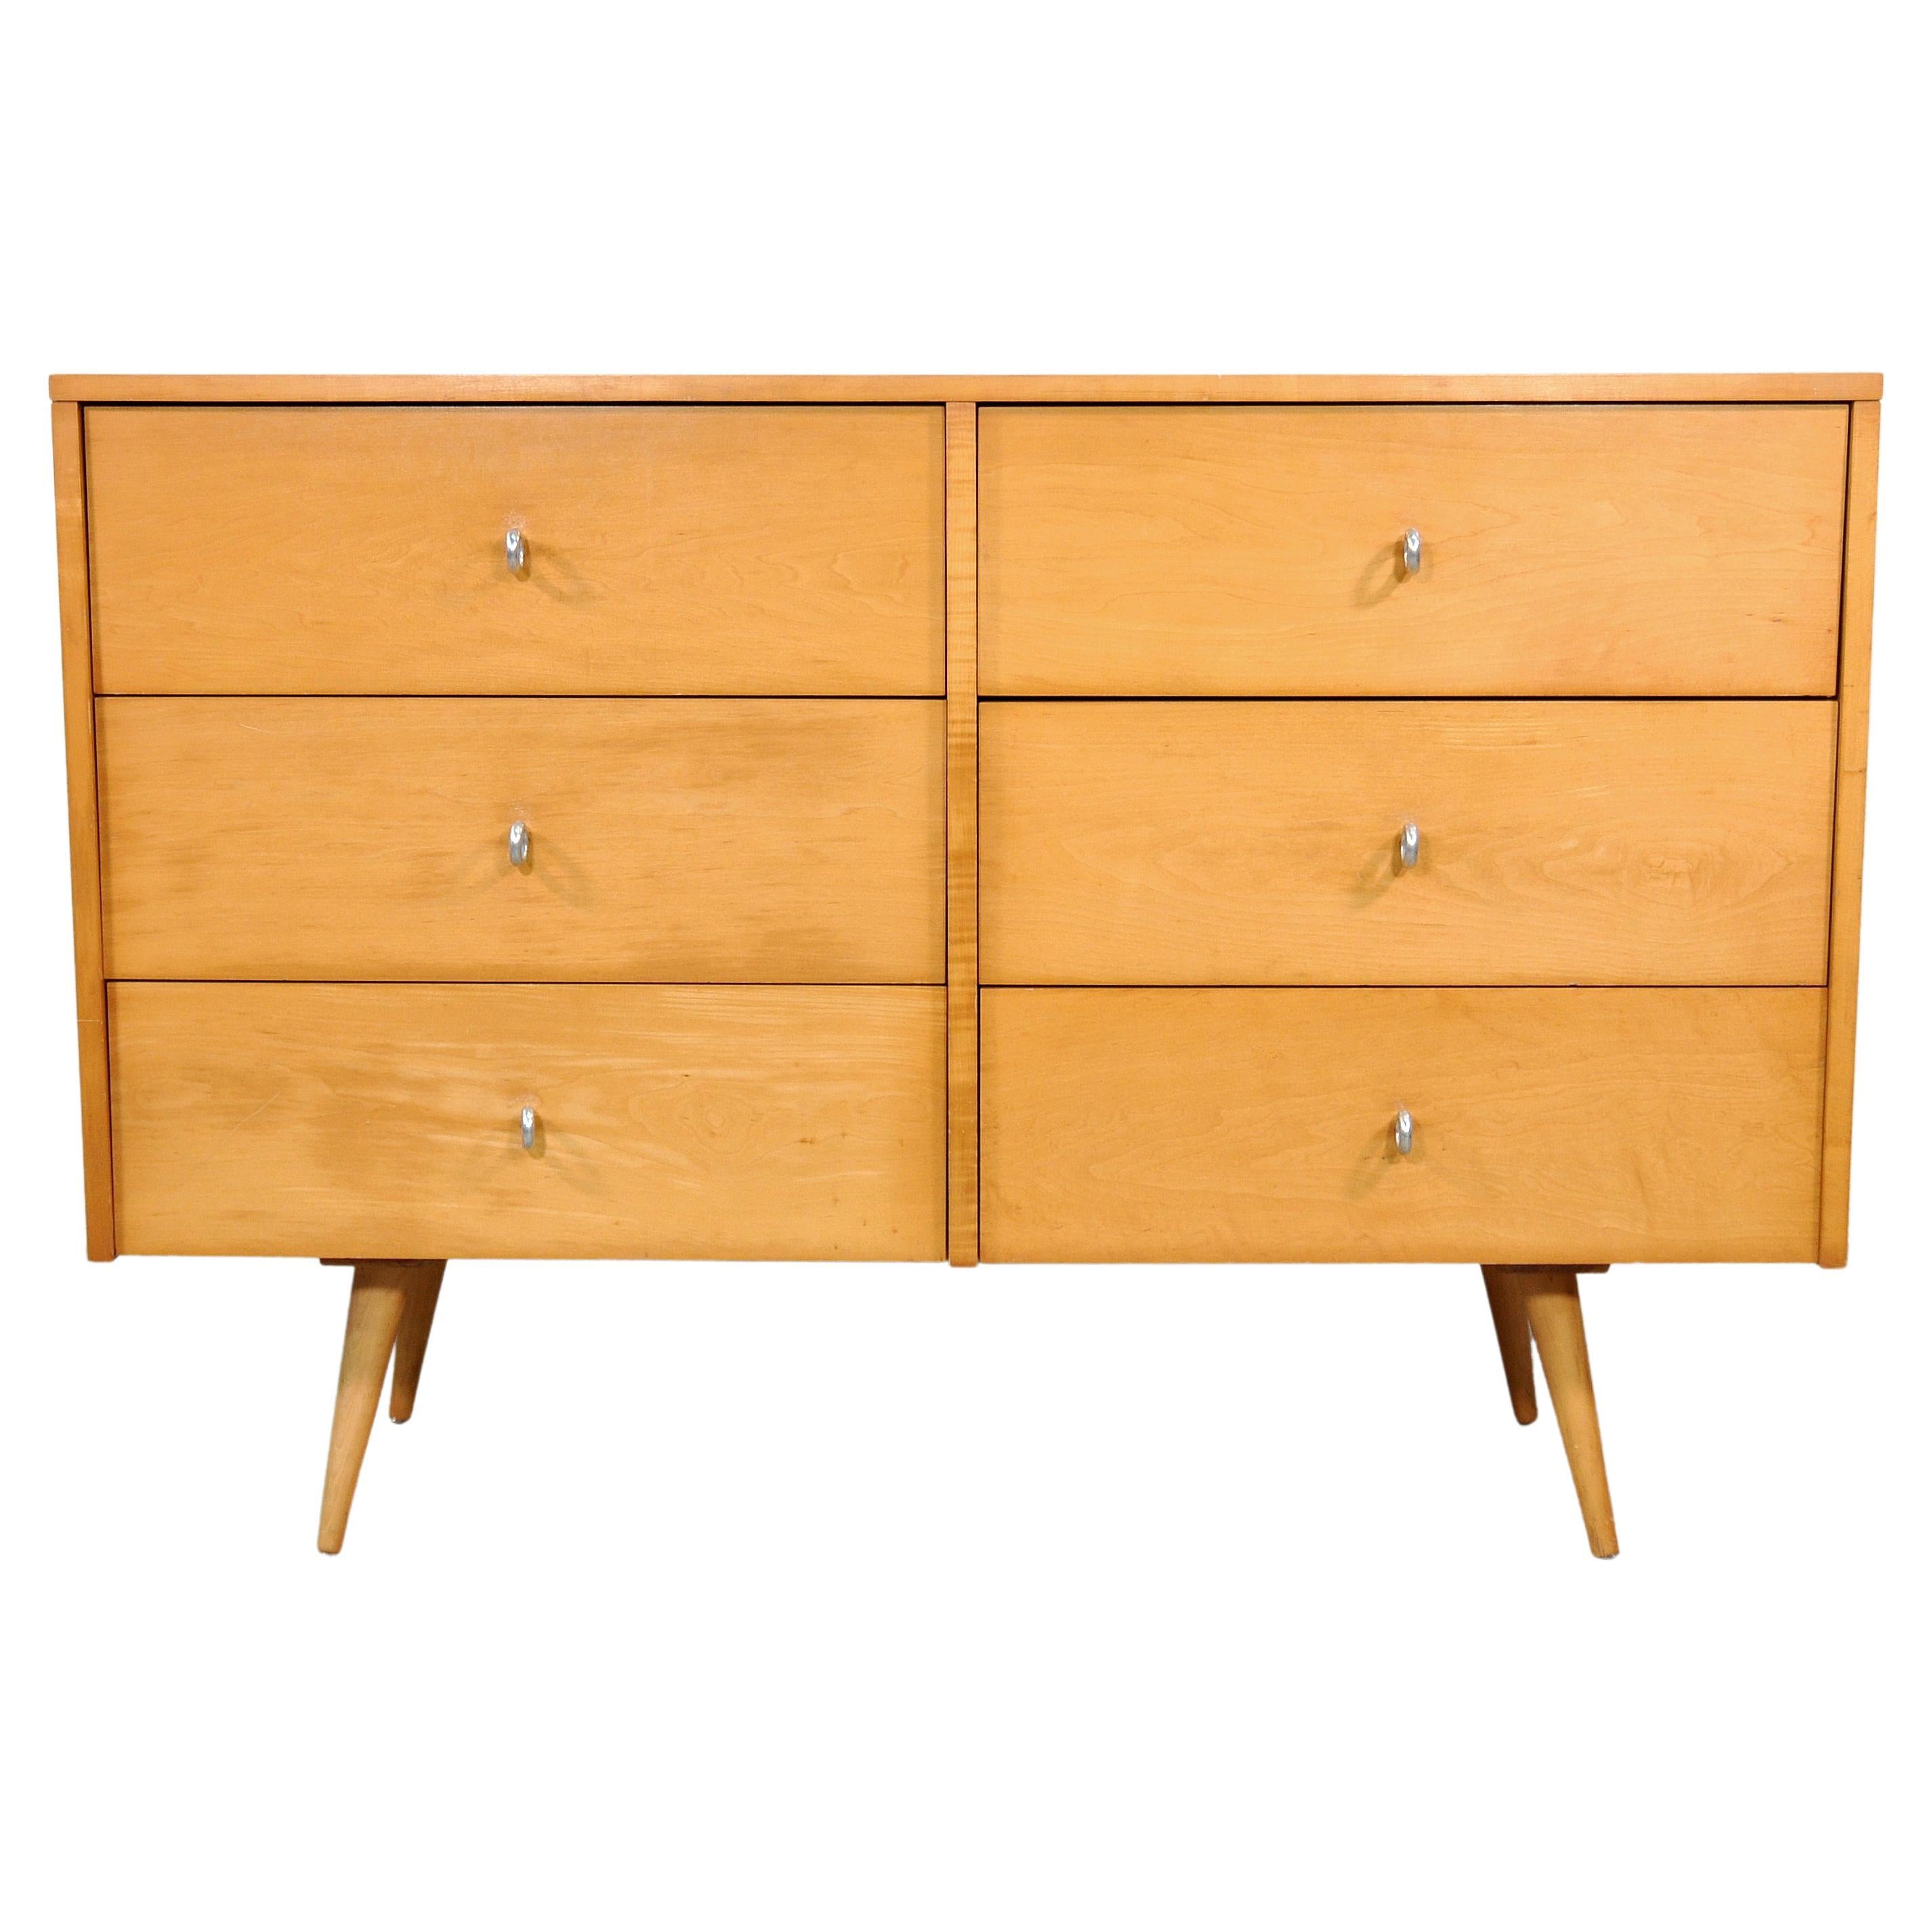 Paul McCobb Maple Double Dresser Planner Group by Winchendon Furniture (Planner Group), 1950s